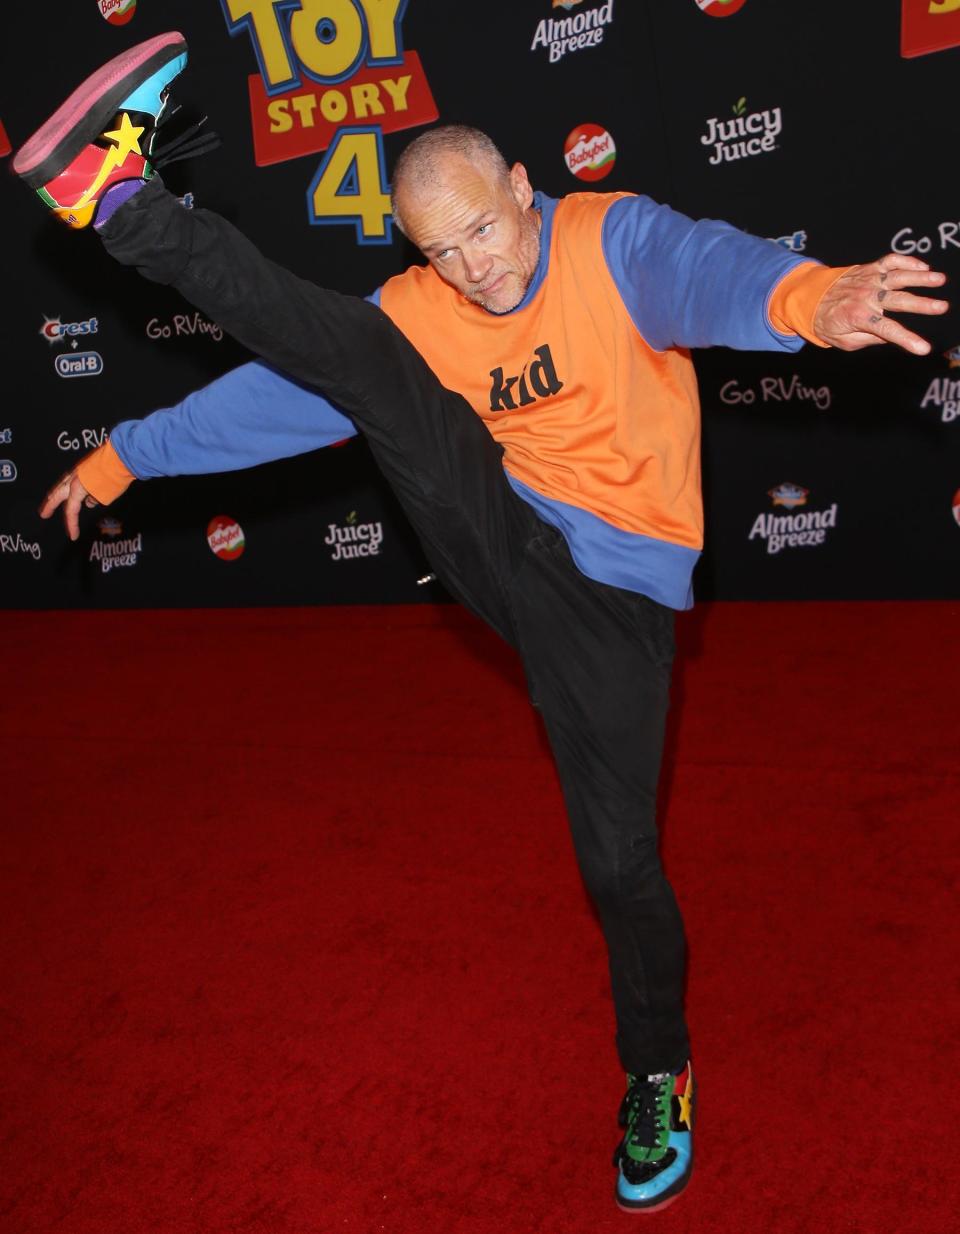 Flea, of the Red Hot Chili Peppers, showed off his signature red carpet move.